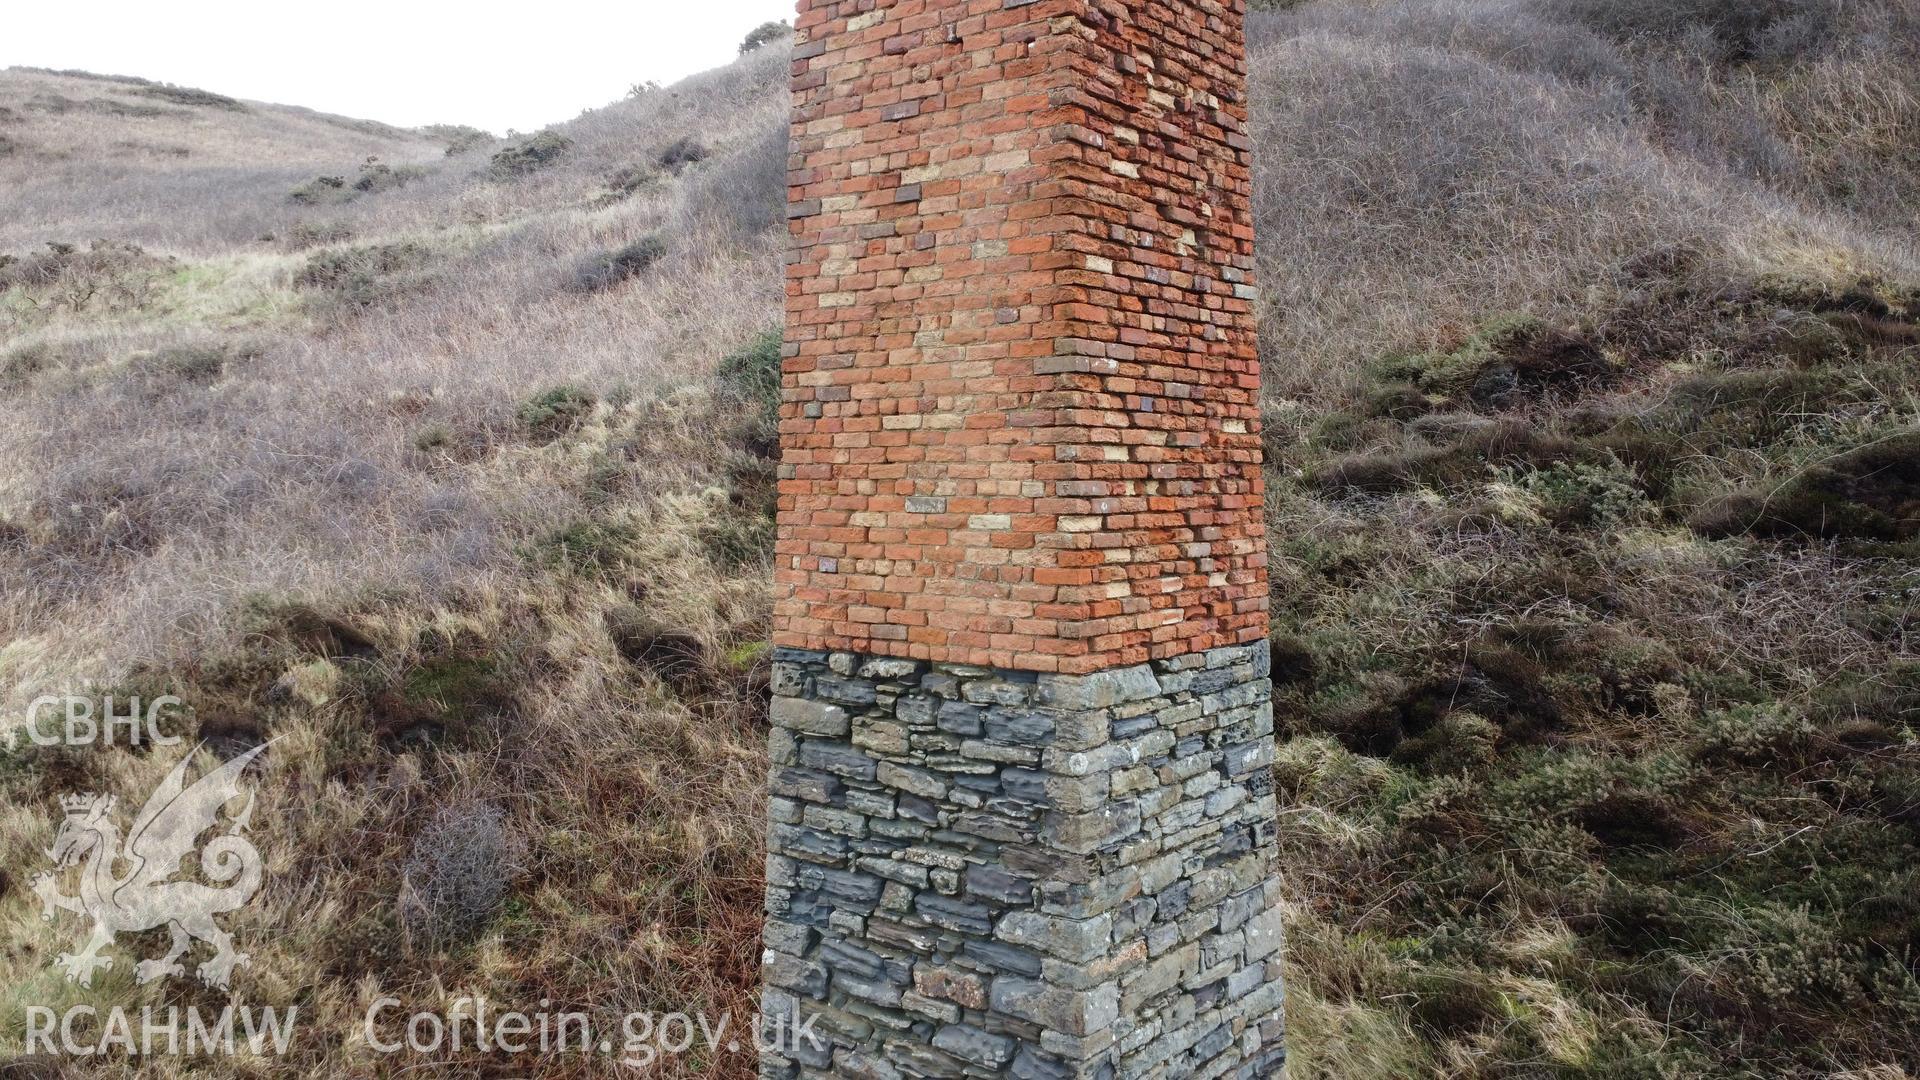 Trefrane Cliff Colliery. Detail of stone to brick transition on north and west faces of chimney.